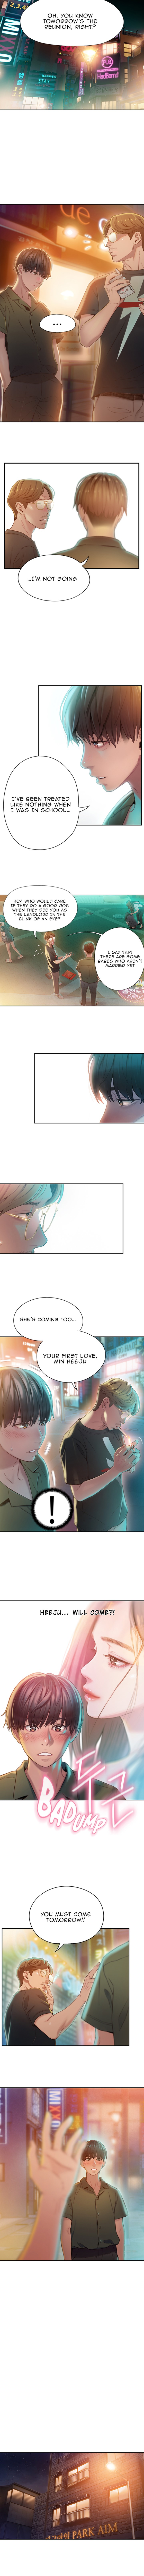 Love Limit Exceeded - Chapter 1 Page 8